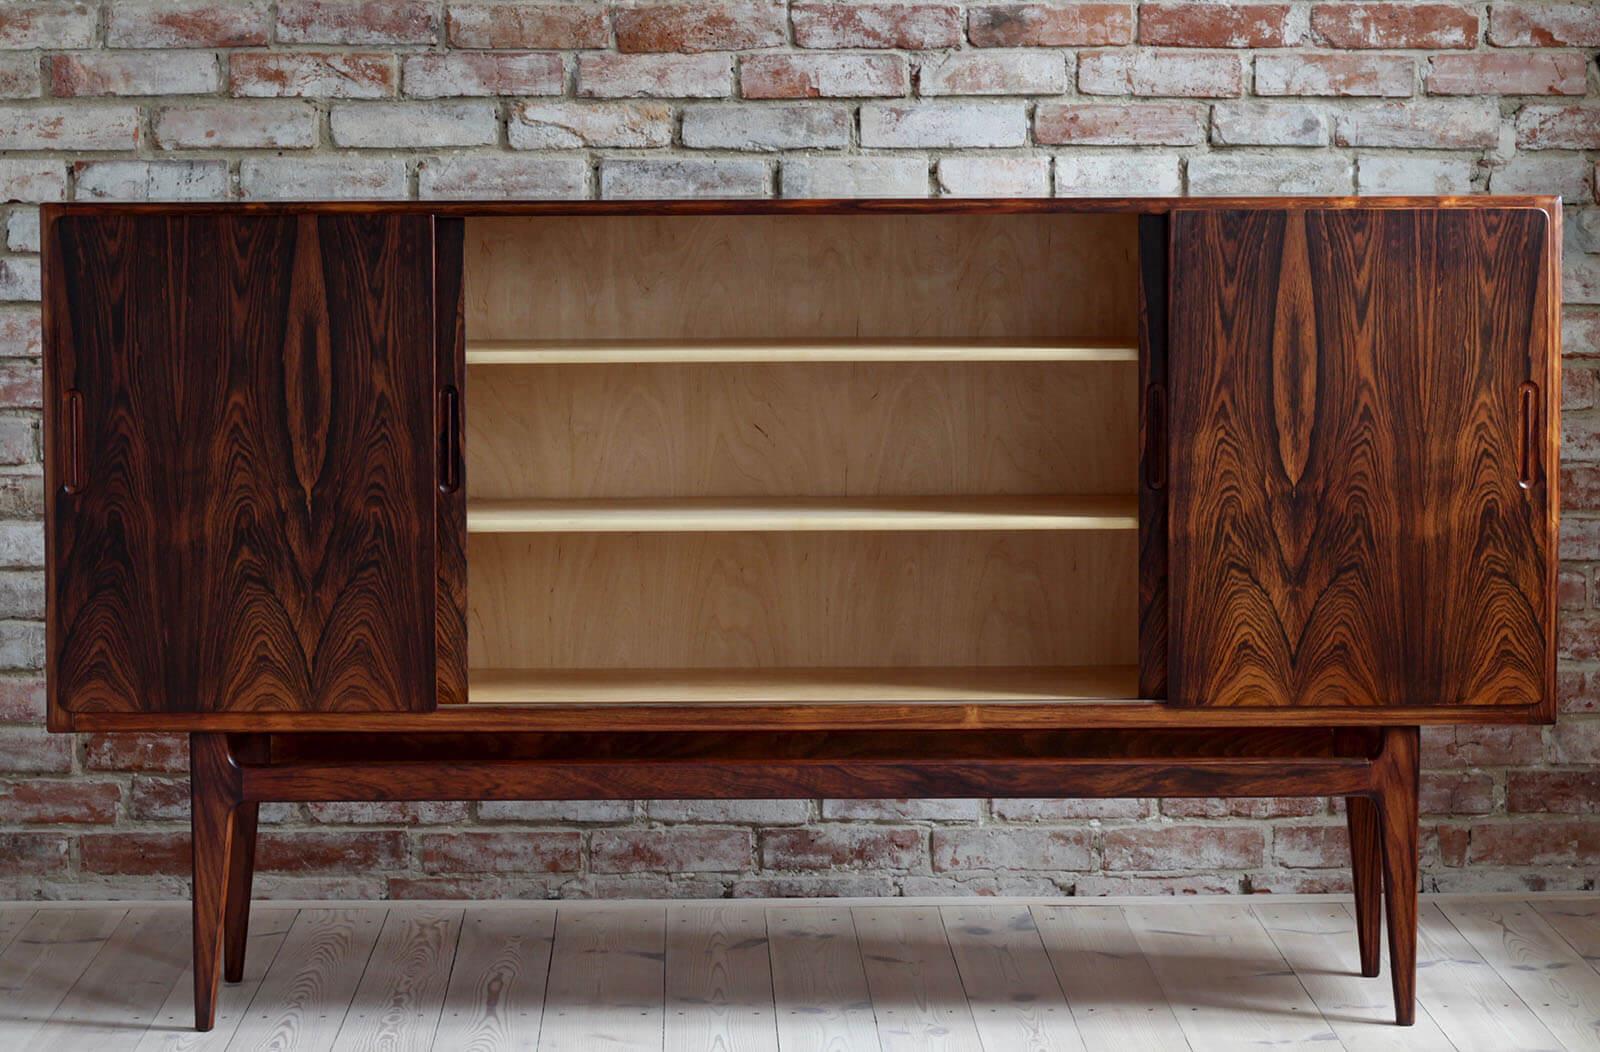 Danish highboard in beautiful rosewood veneer. The piece was designed and made in 1960s and is a great example of Danish midcentury design in its best. It features three storage sections that provide lots of space. The middle section has two large